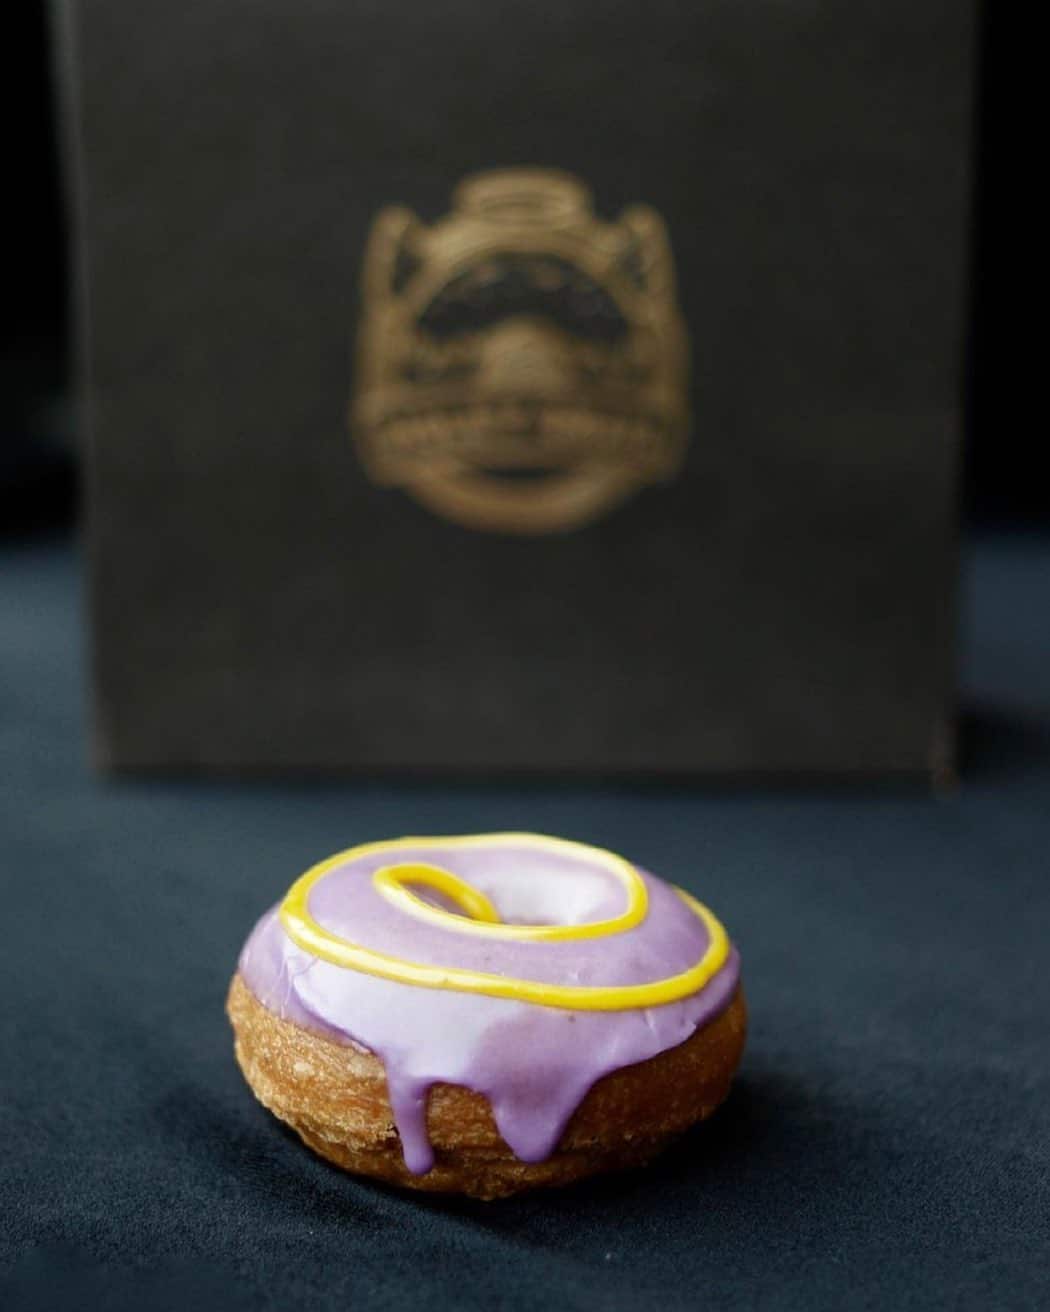 We take donuts very seriously. Here at Ward Village, you can celebrate National Donut Day by visiting @holeygraildonuts and snagging a free “Purple Haze” donut with your purchase. The lilikoi ube flavored treat is one of Holey Grail’s most coveted donuts!